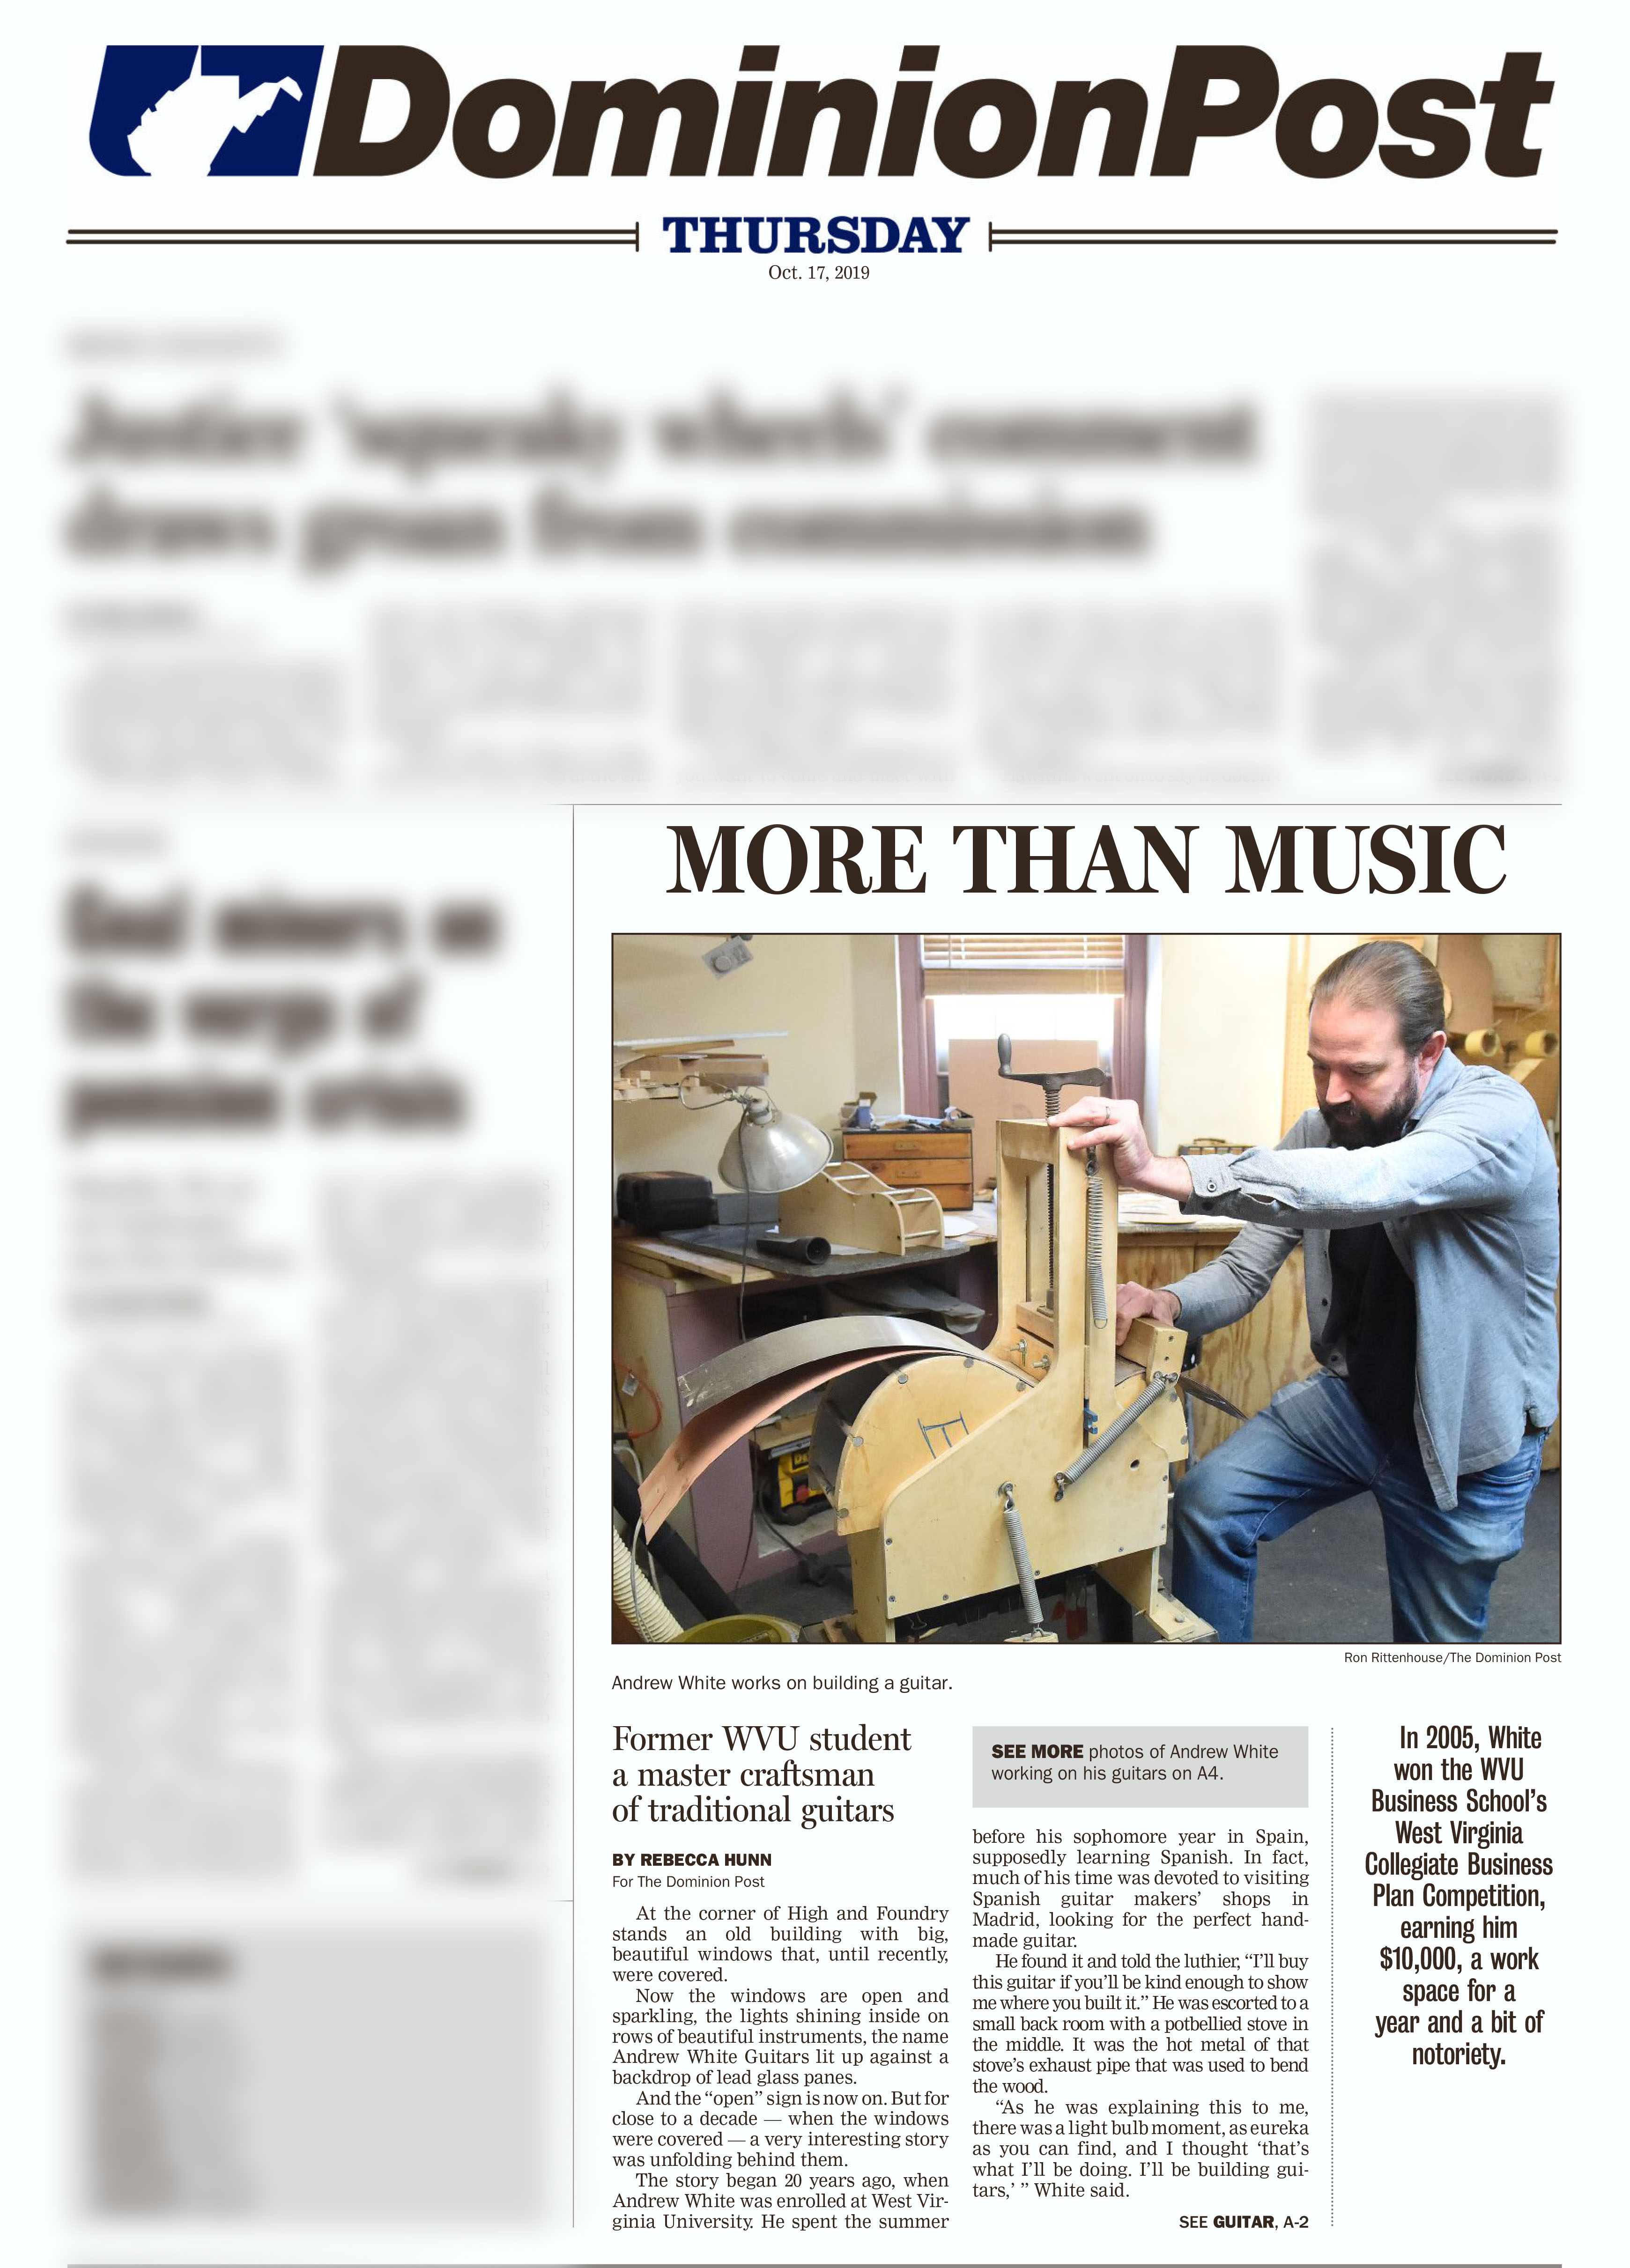 Check out this great article on us in the Newspaper!